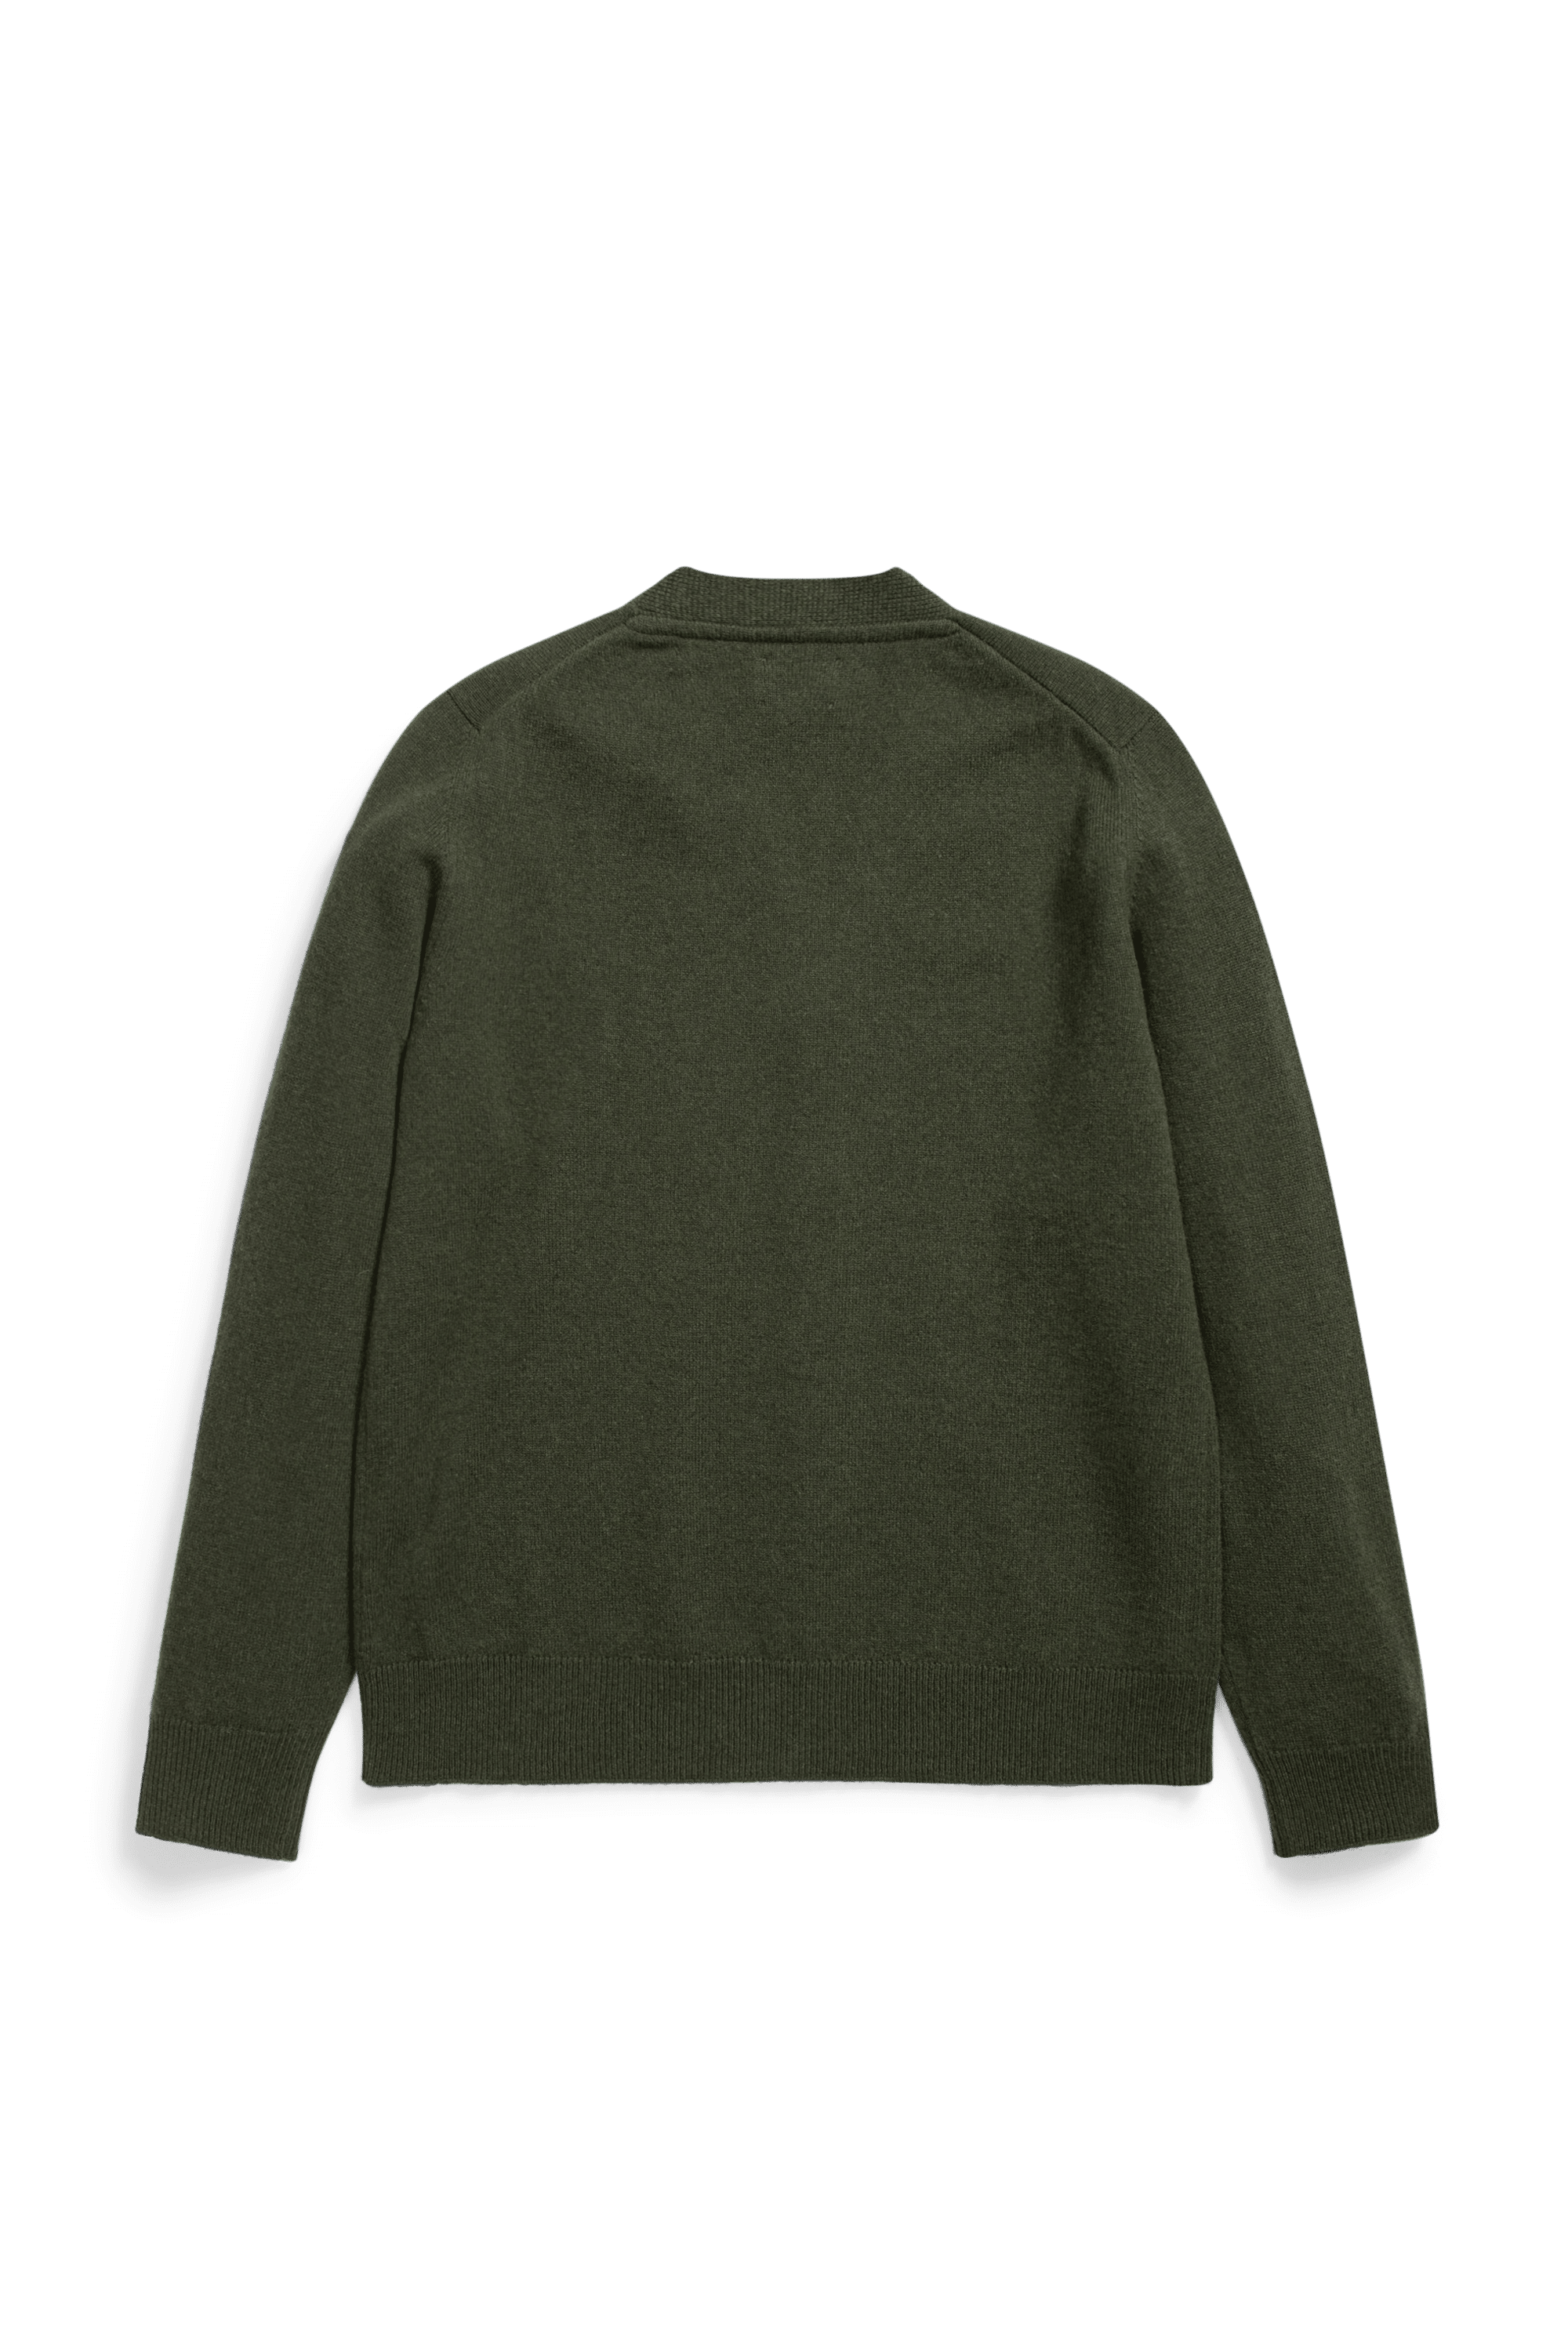 NORSE PROJECTS Adam Lambswool Cardigan - Army Green Back